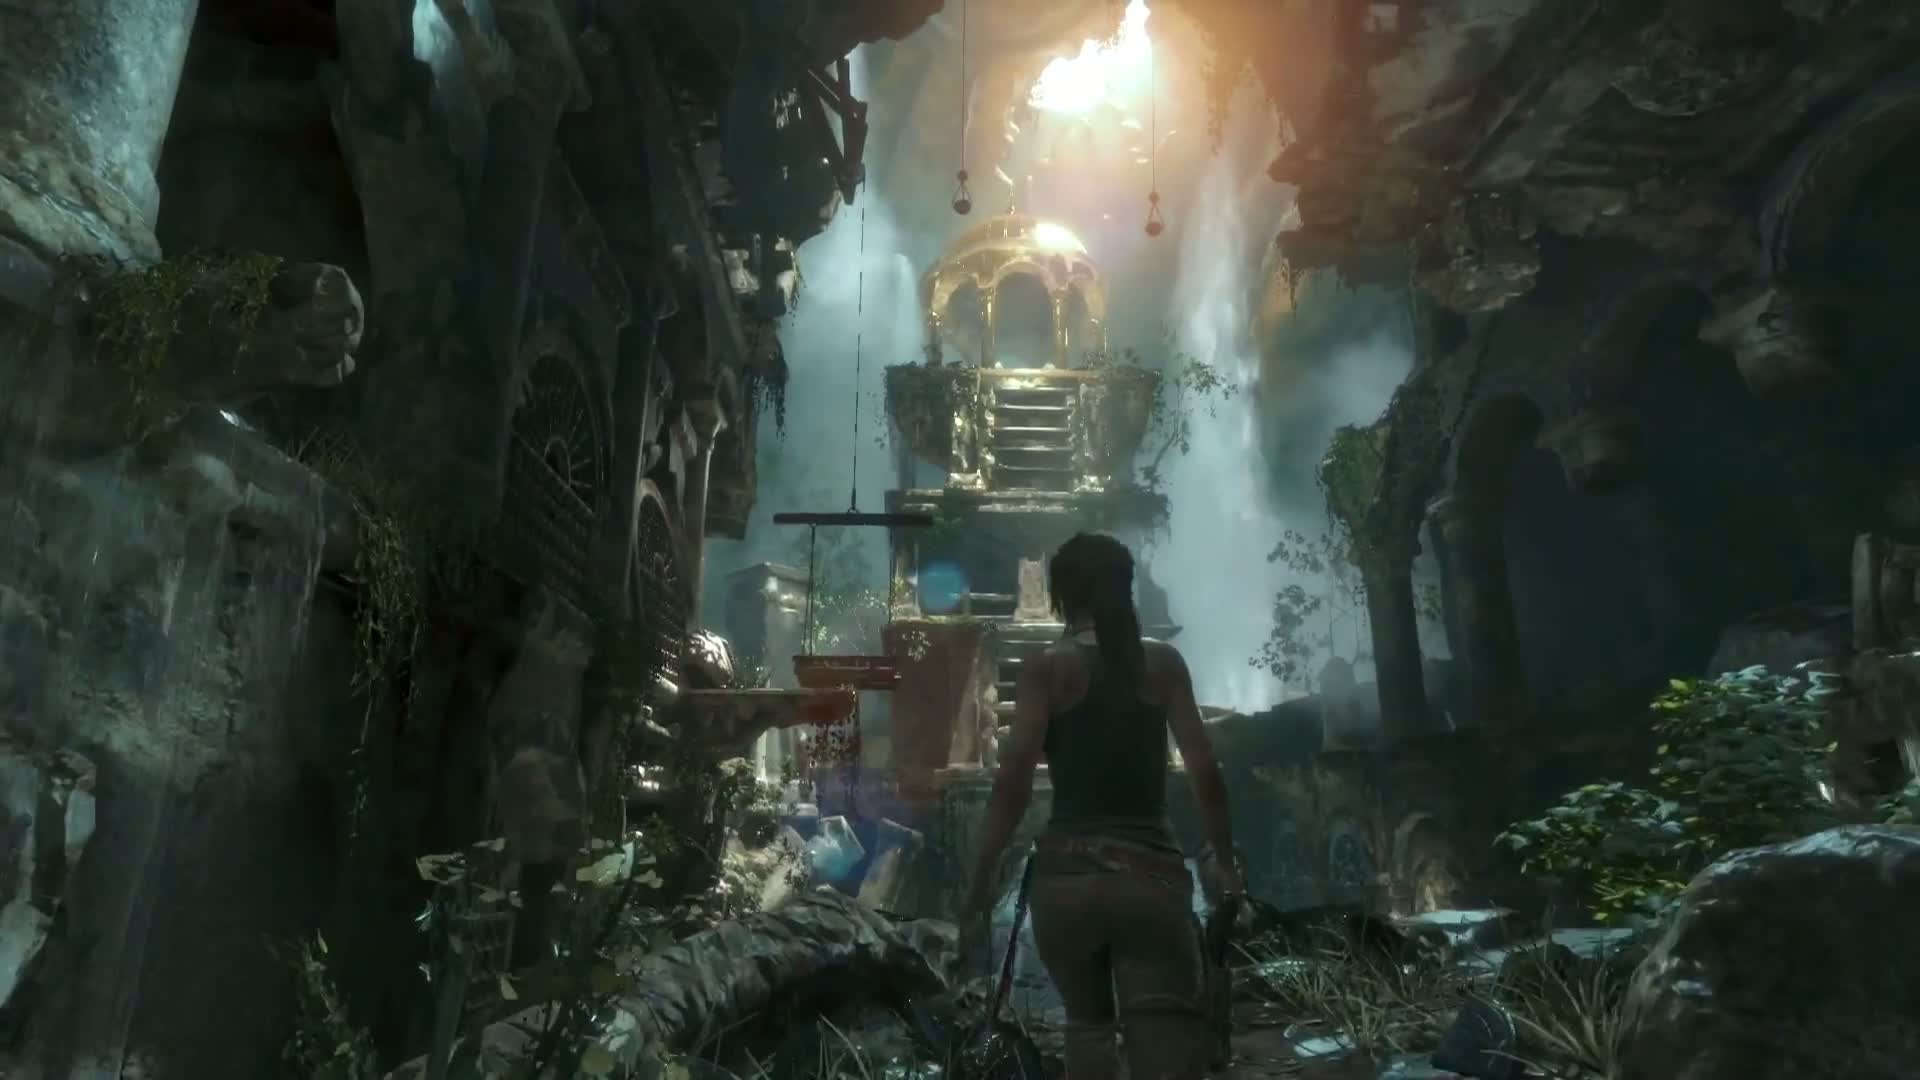 rise of the tomb raider pc demo